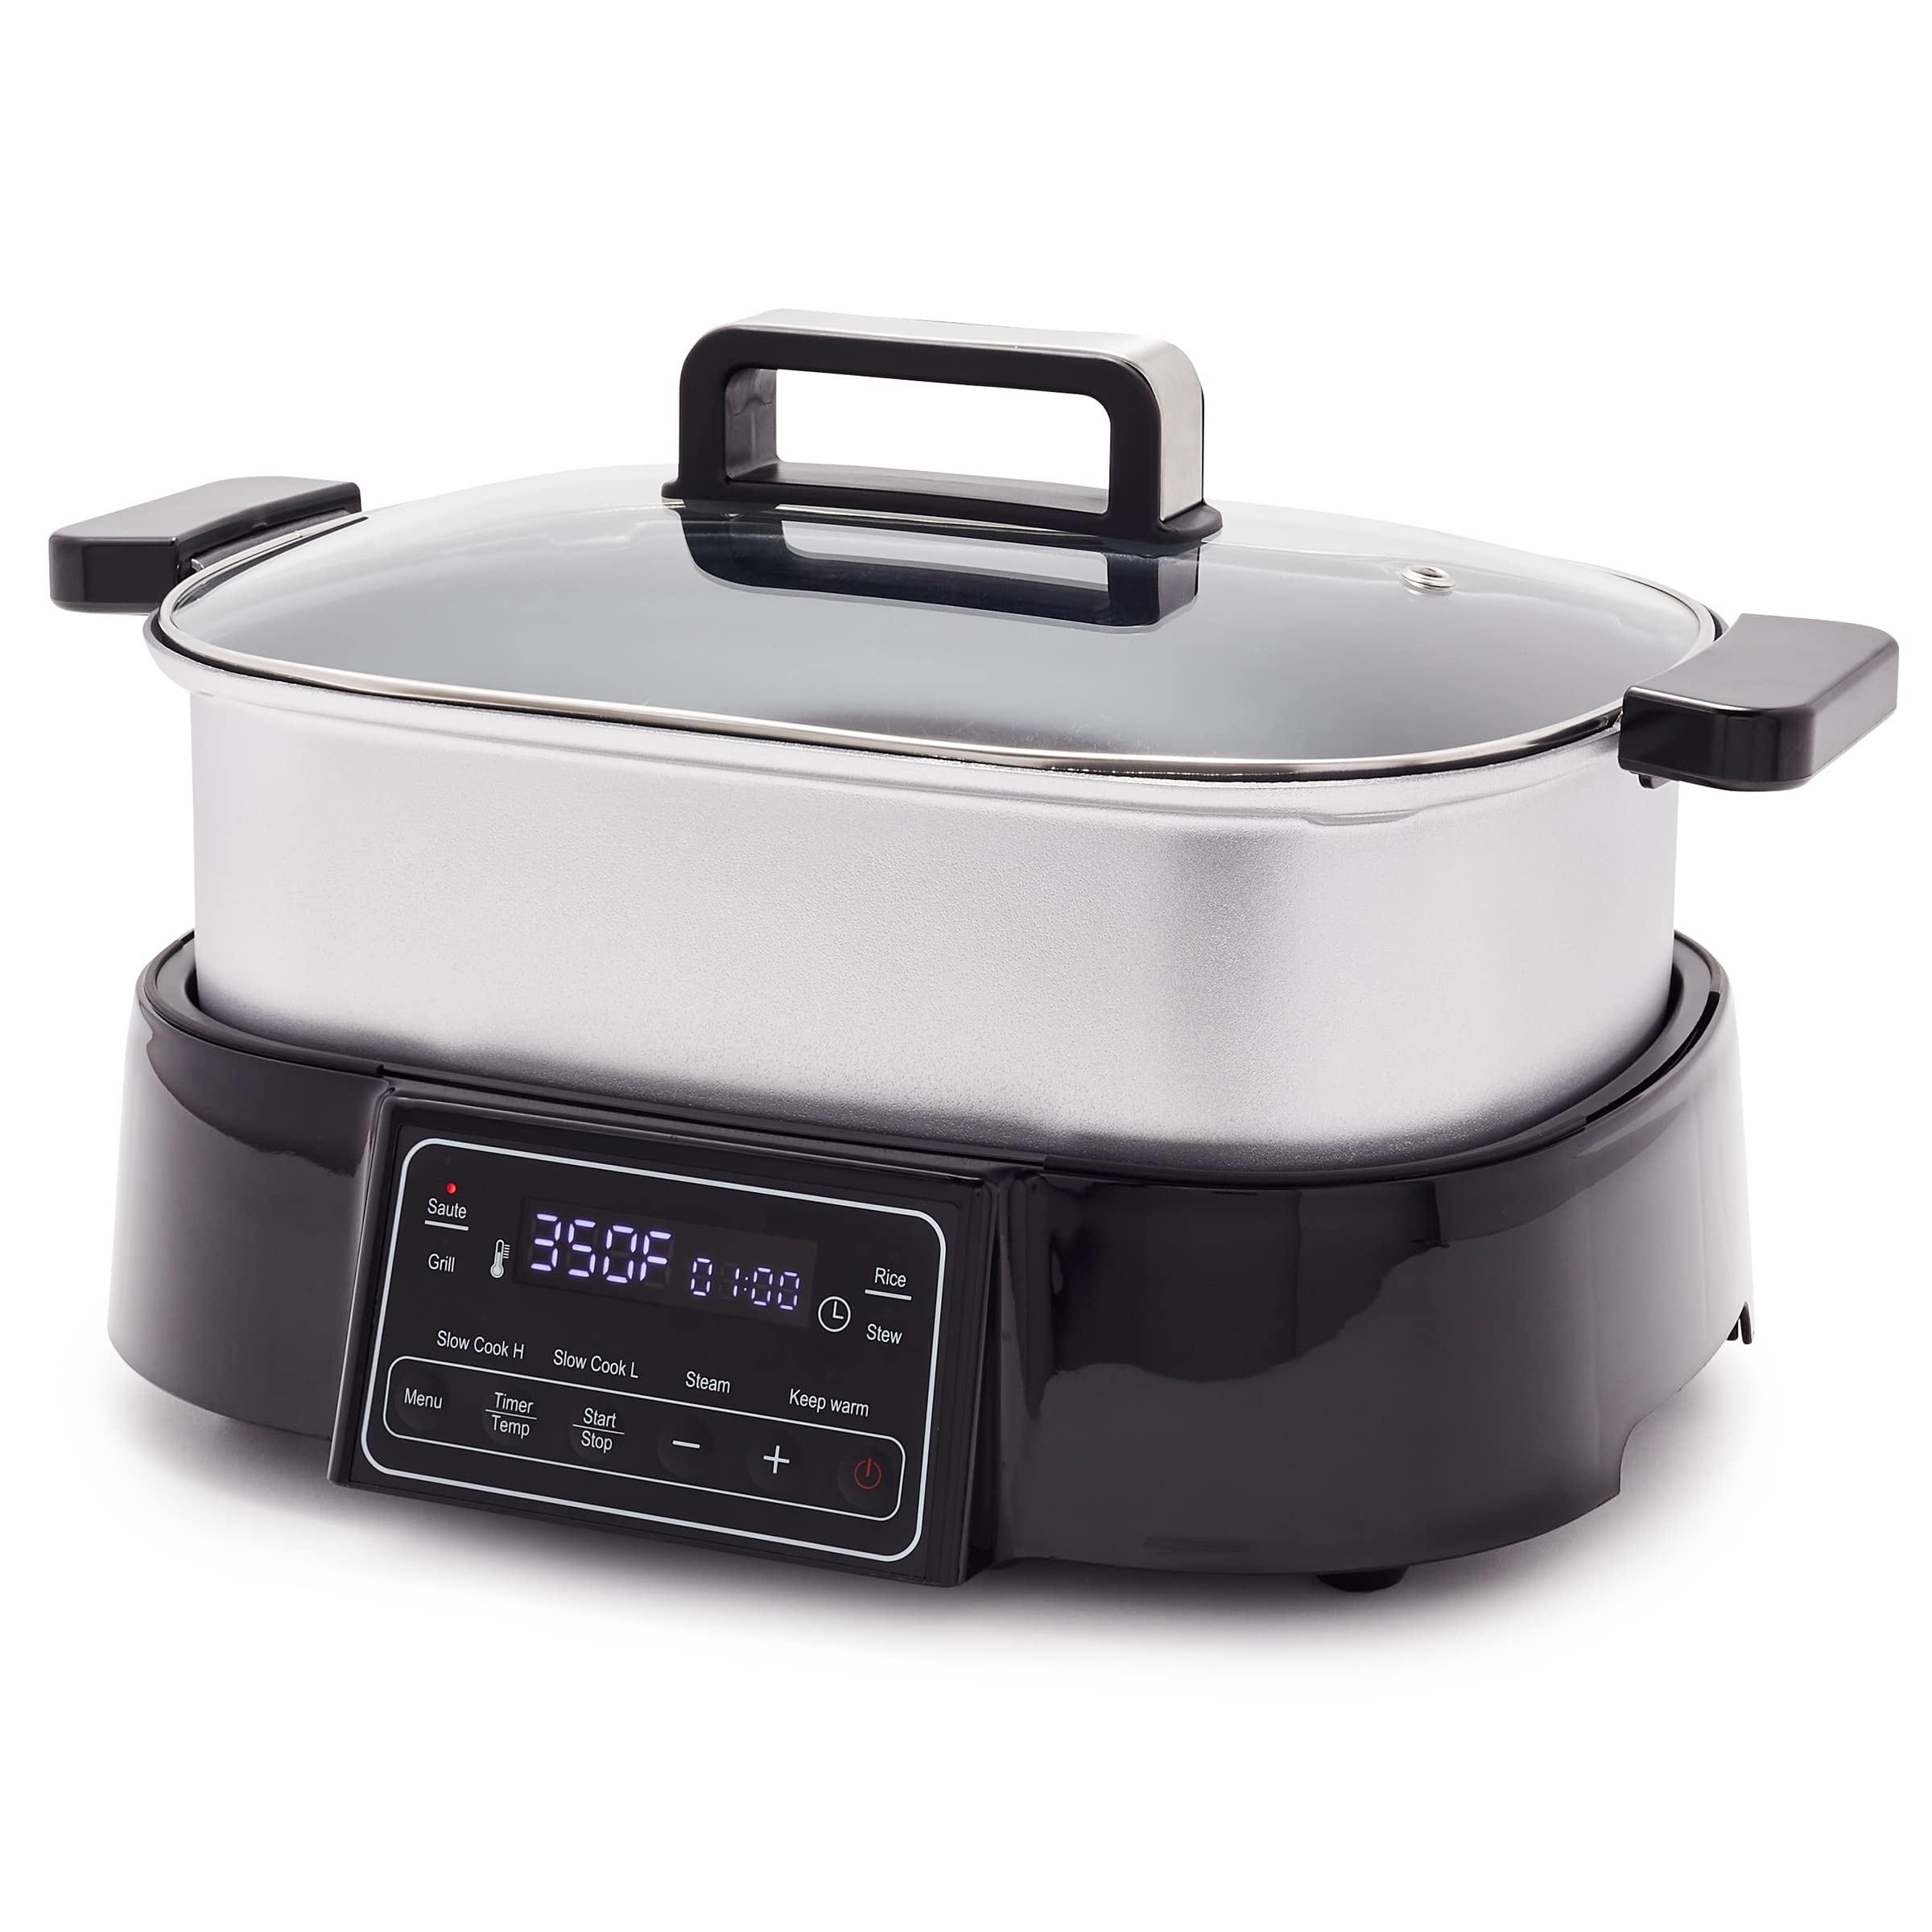 Stainless Steel 8-in-1 Skillet Grill & Slow Cooker, Presets to Saute Steam Stir-Fry and Cook Rice, Dishwasher Safe